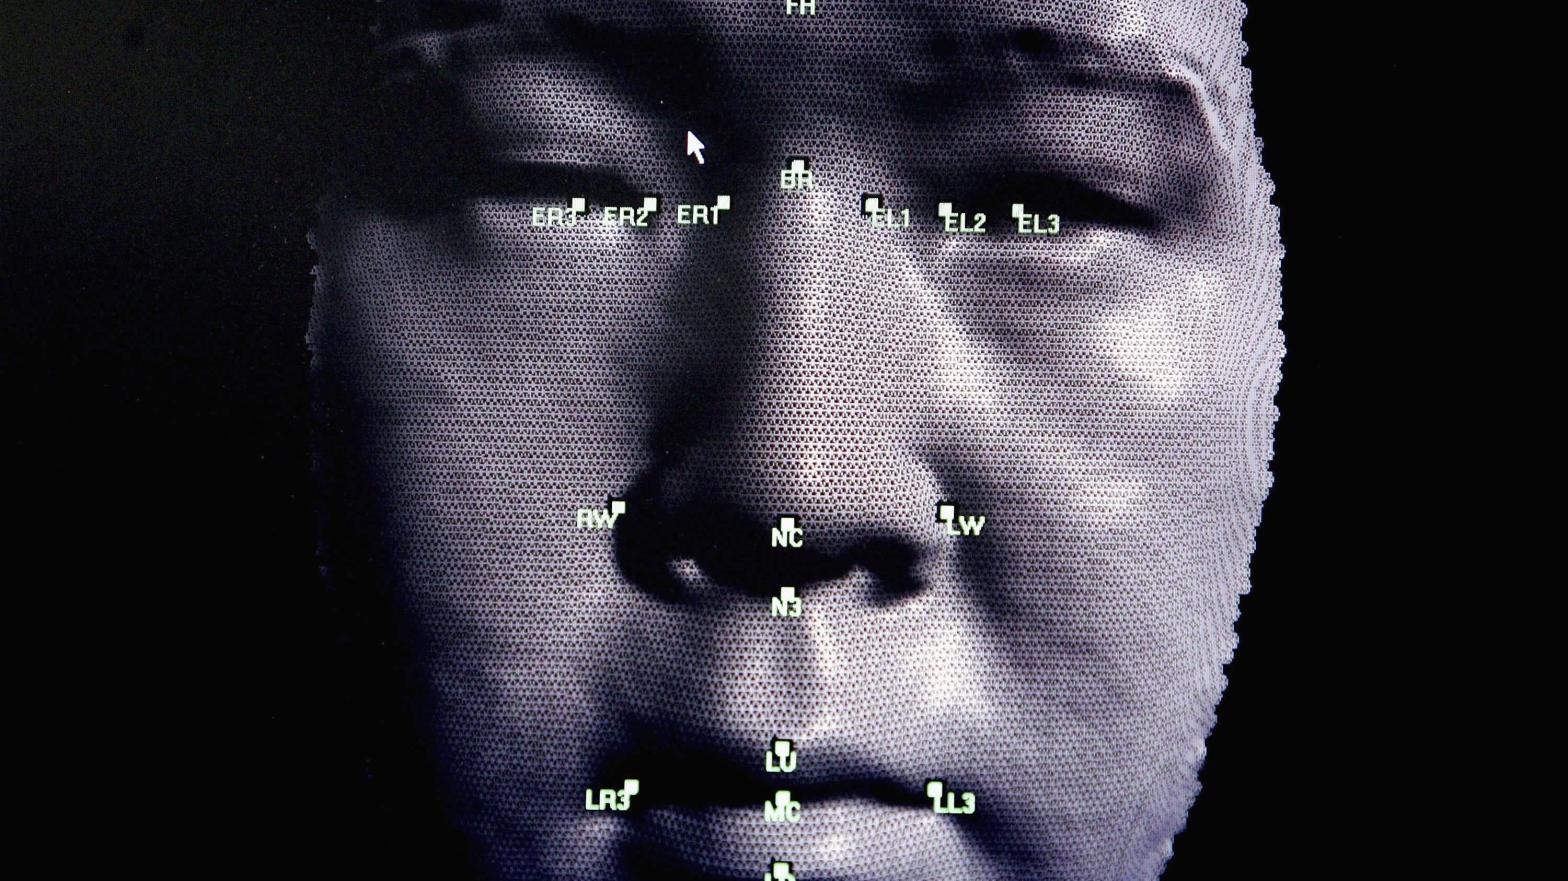 A 3D facial recognition program is demonstrated during the Biometrics 2004 exhibition and conference October 14, 2004 in London  (Photo: an Waldie, Getty Images)